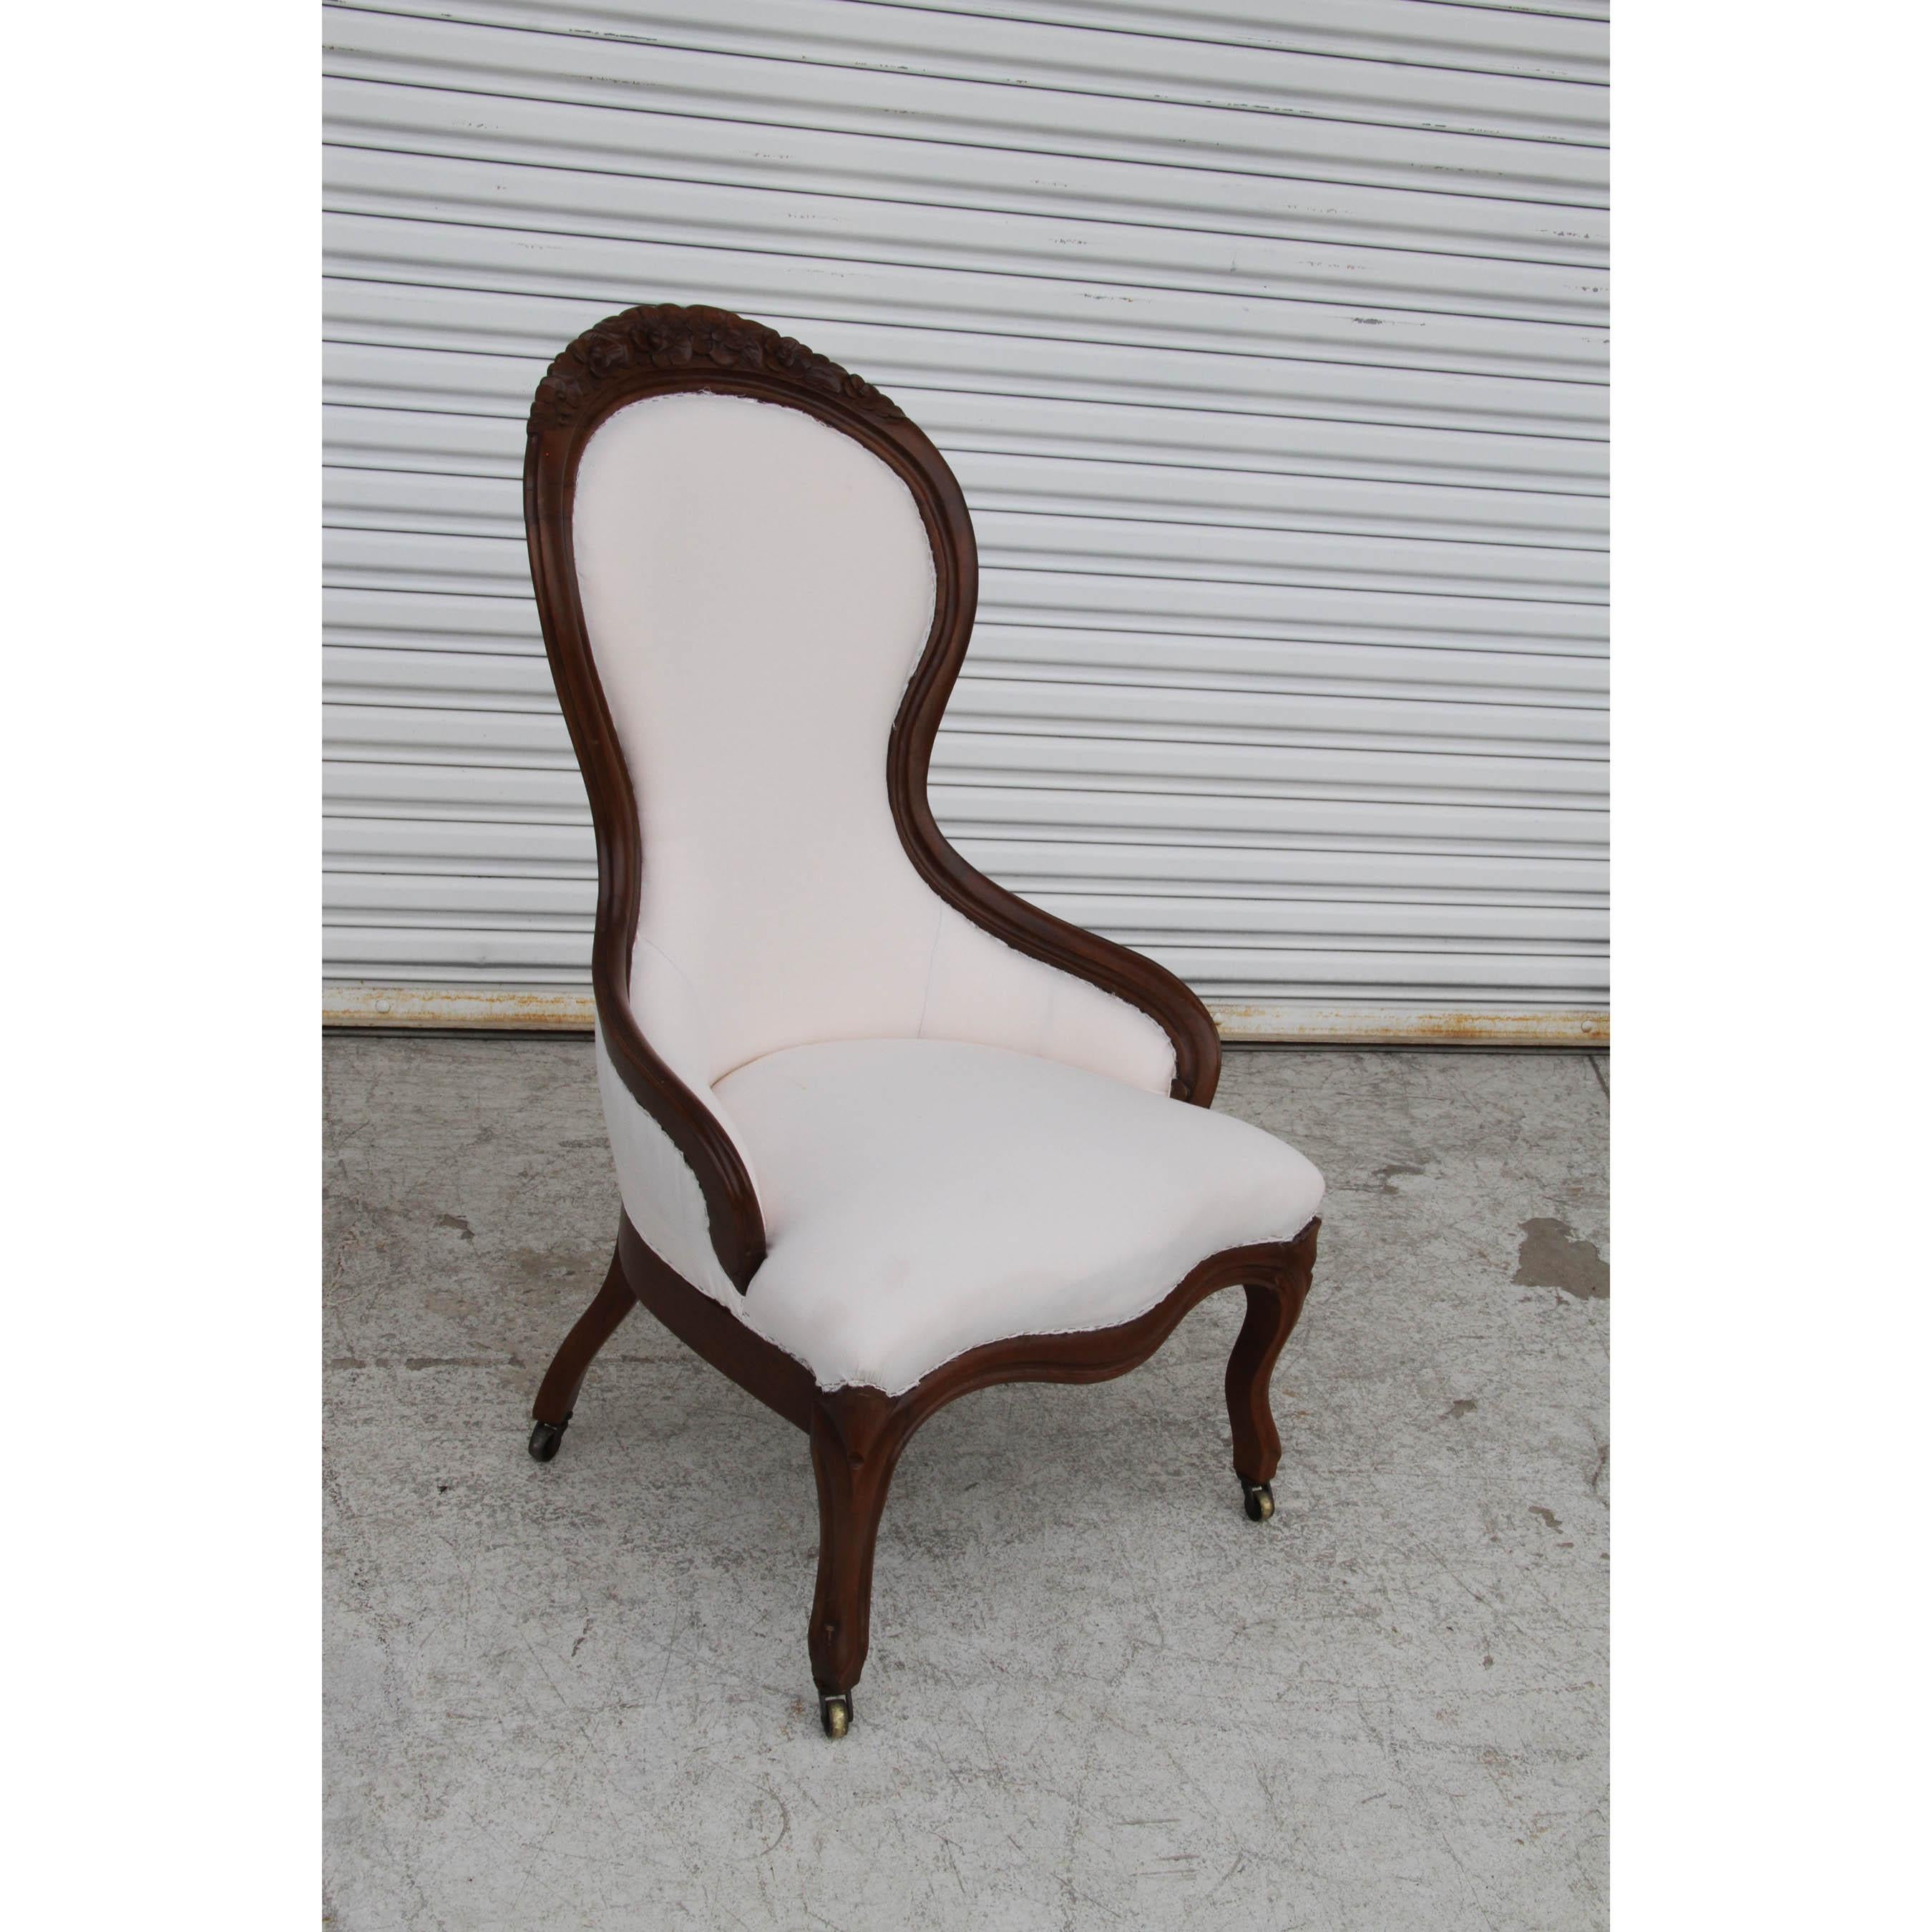 Victorian style spoon back parlor lounge chair.
 
Victorian style chair with a spoon back. Mahogany with Cabriole legs on original castors. 


 